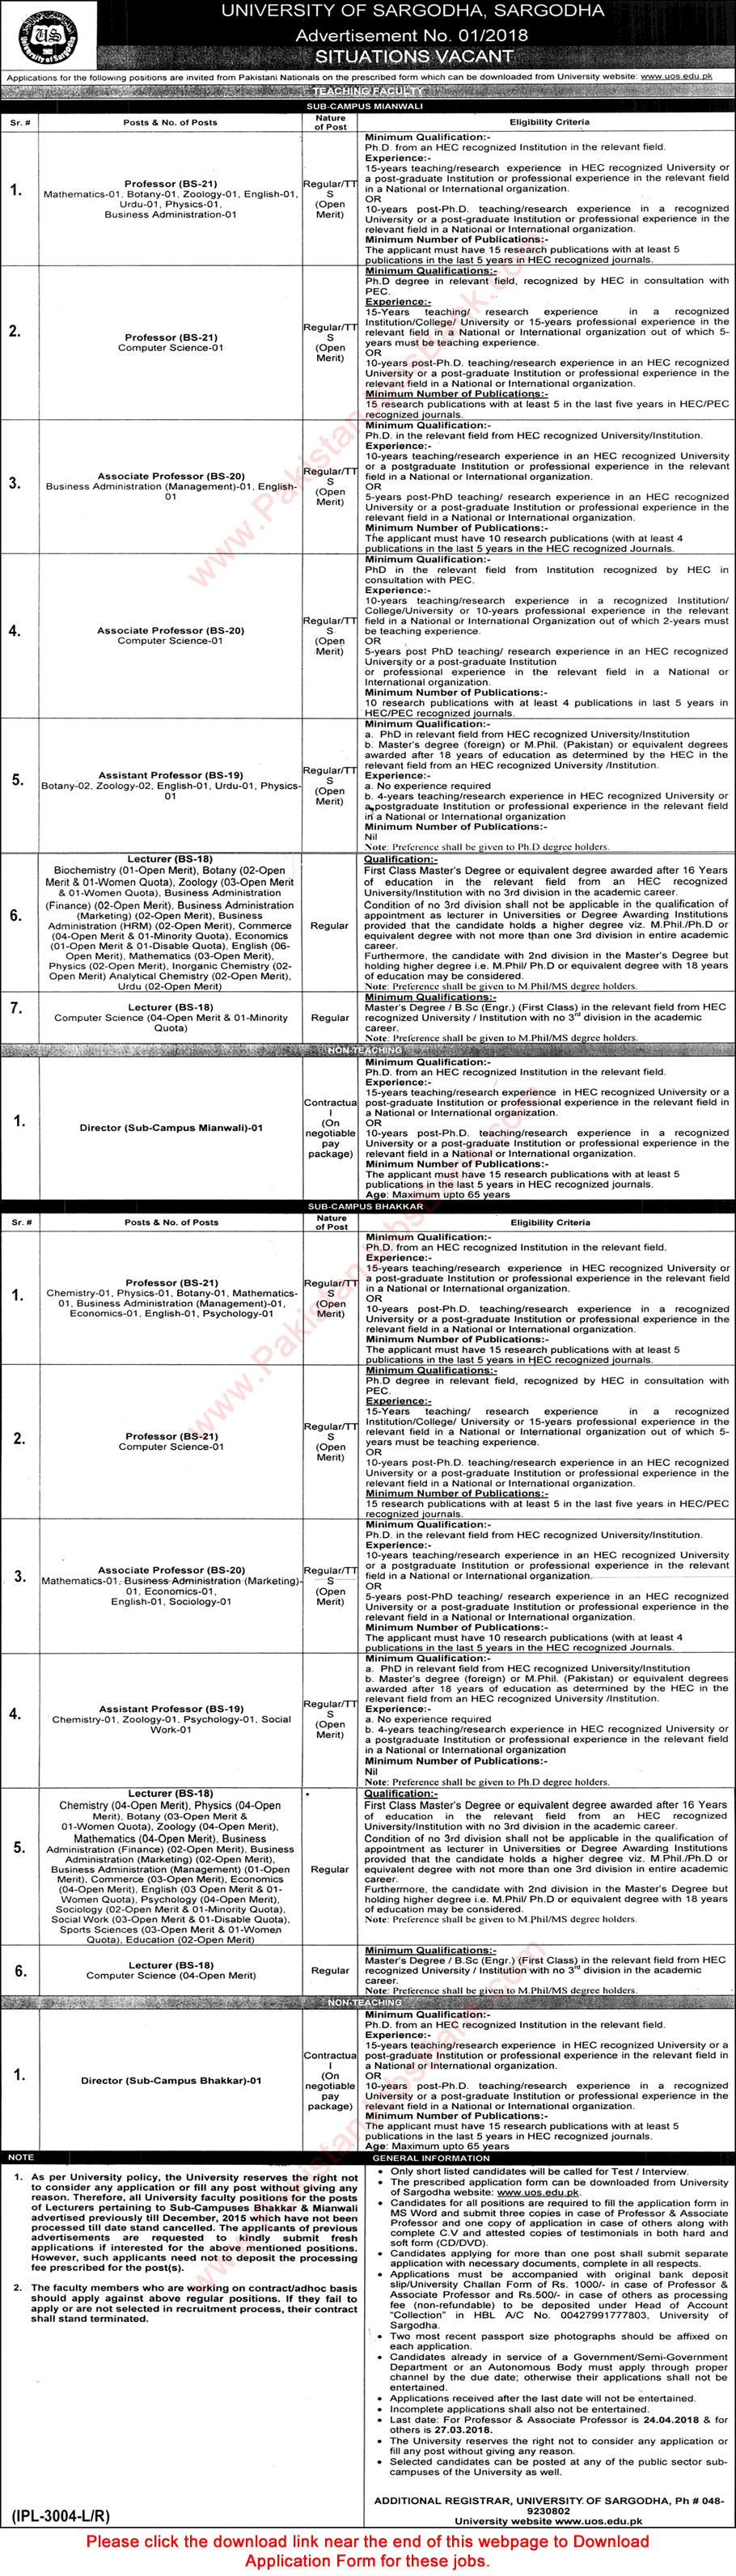 University of Sargodha Jobs March 2018 Application Form Teaching Faculty & Others Latest